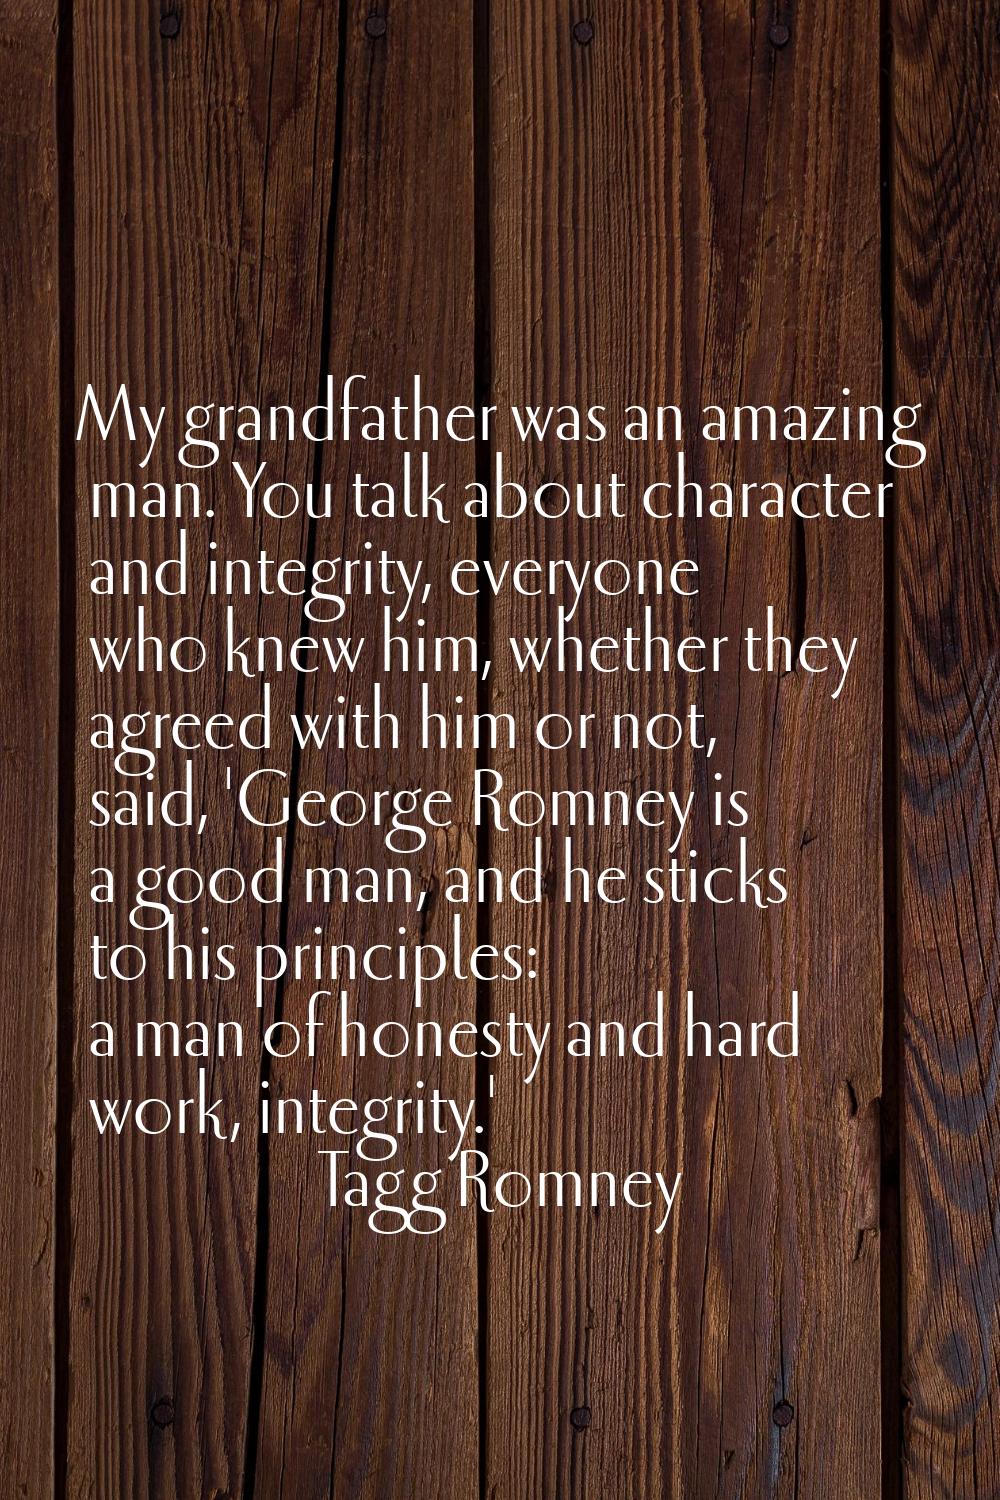 My grandfather was an amazing man. You talk about character and integrity, everyone who knew him, w